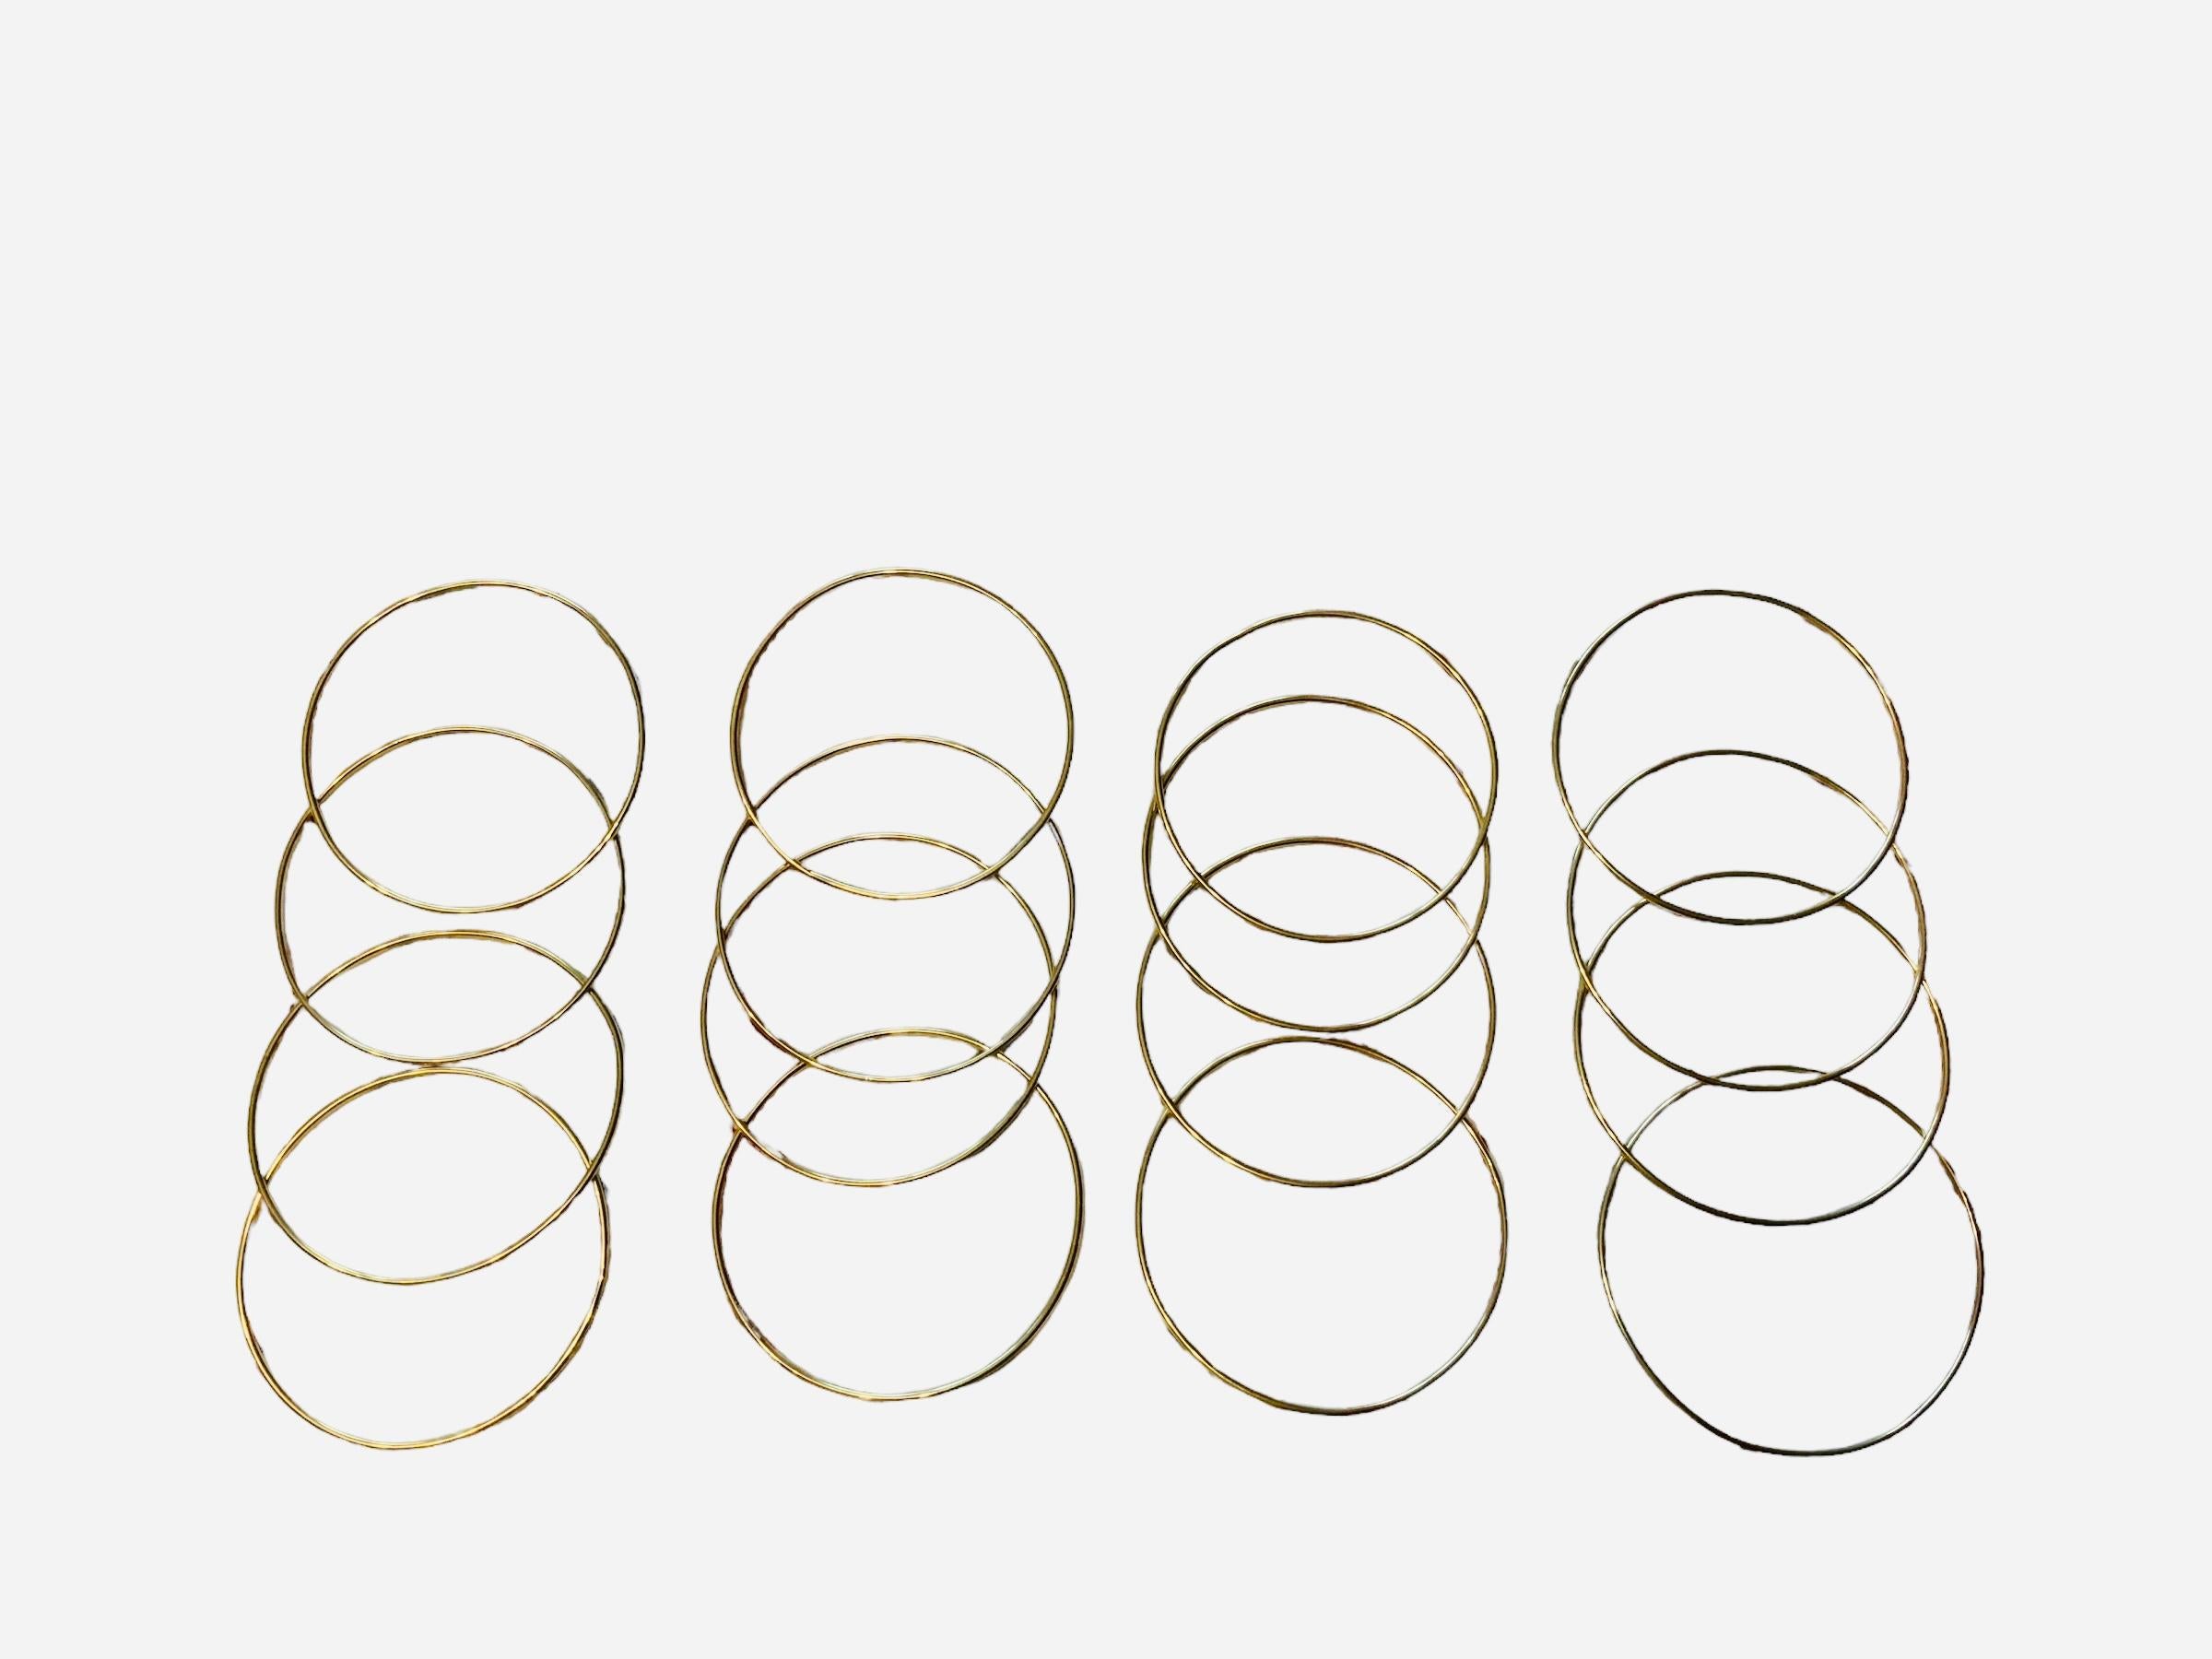 This is a cluster of  14K and 18K yellow gold bangles. It depicts a bundle of thin solid tubular bangles.